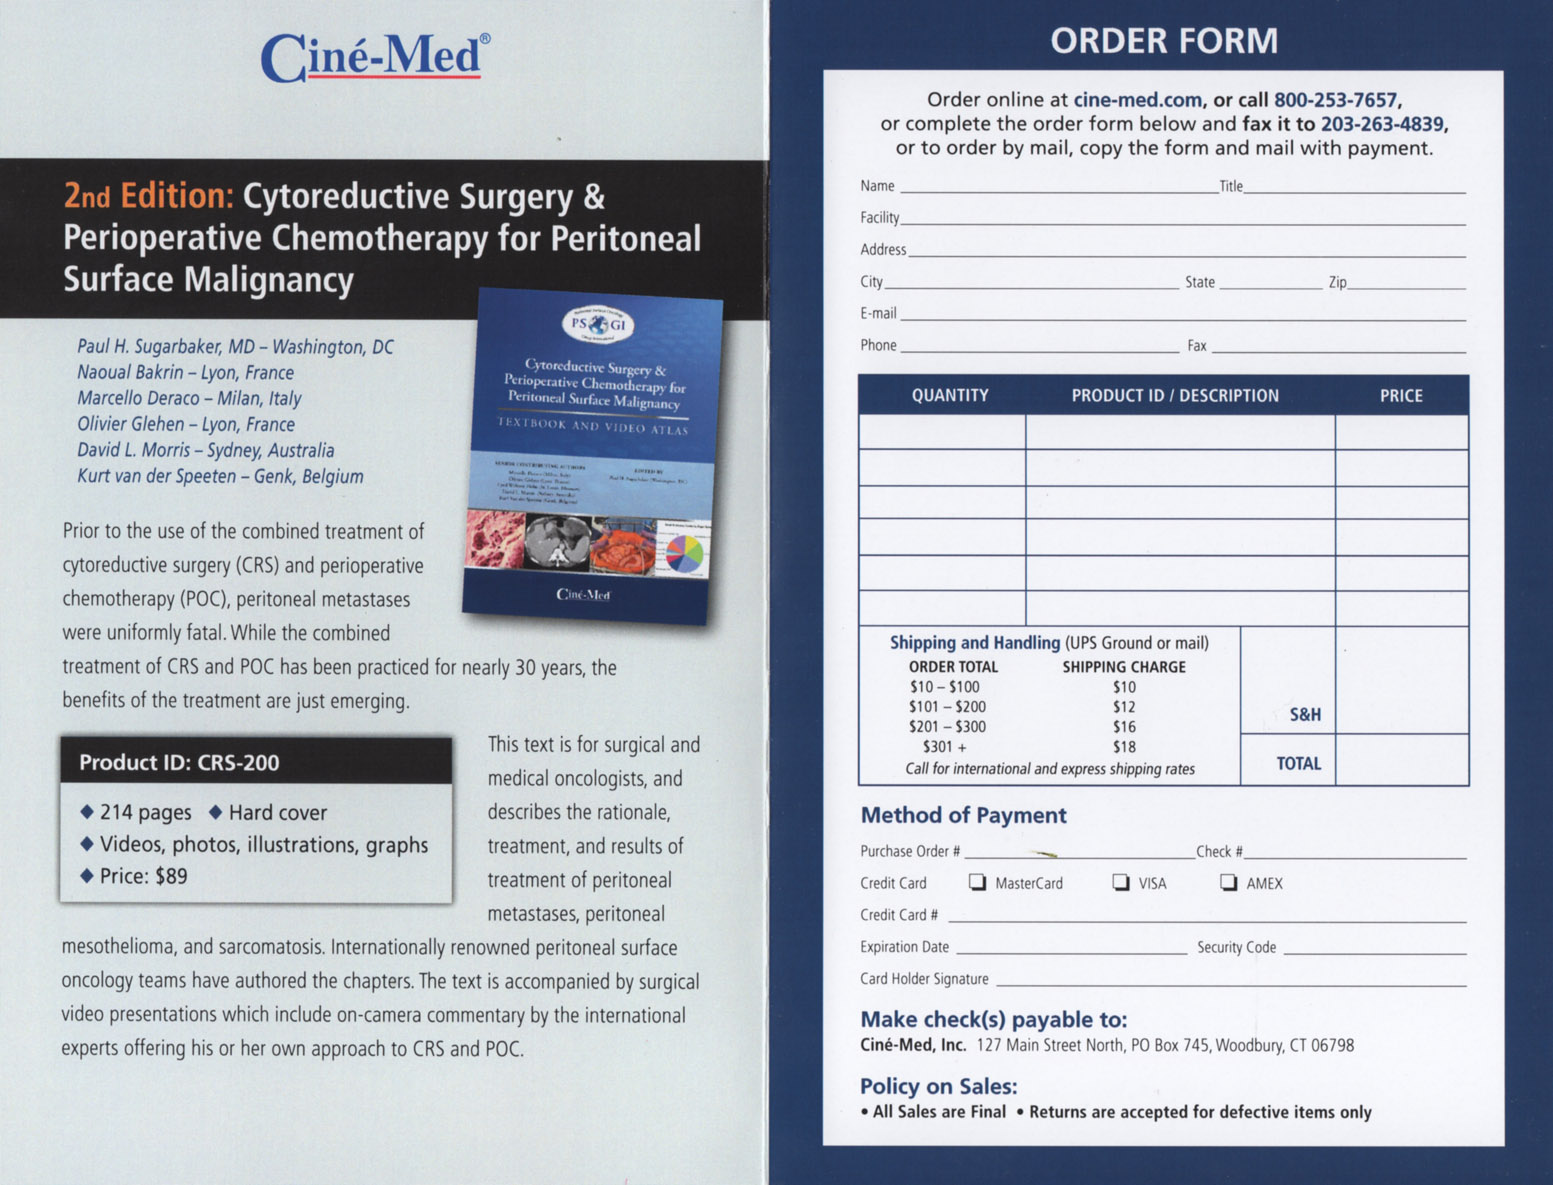 Cytoreductive Surgery and Perioperative Chemotherapy for Peritoneal Surface Malignancy - order form